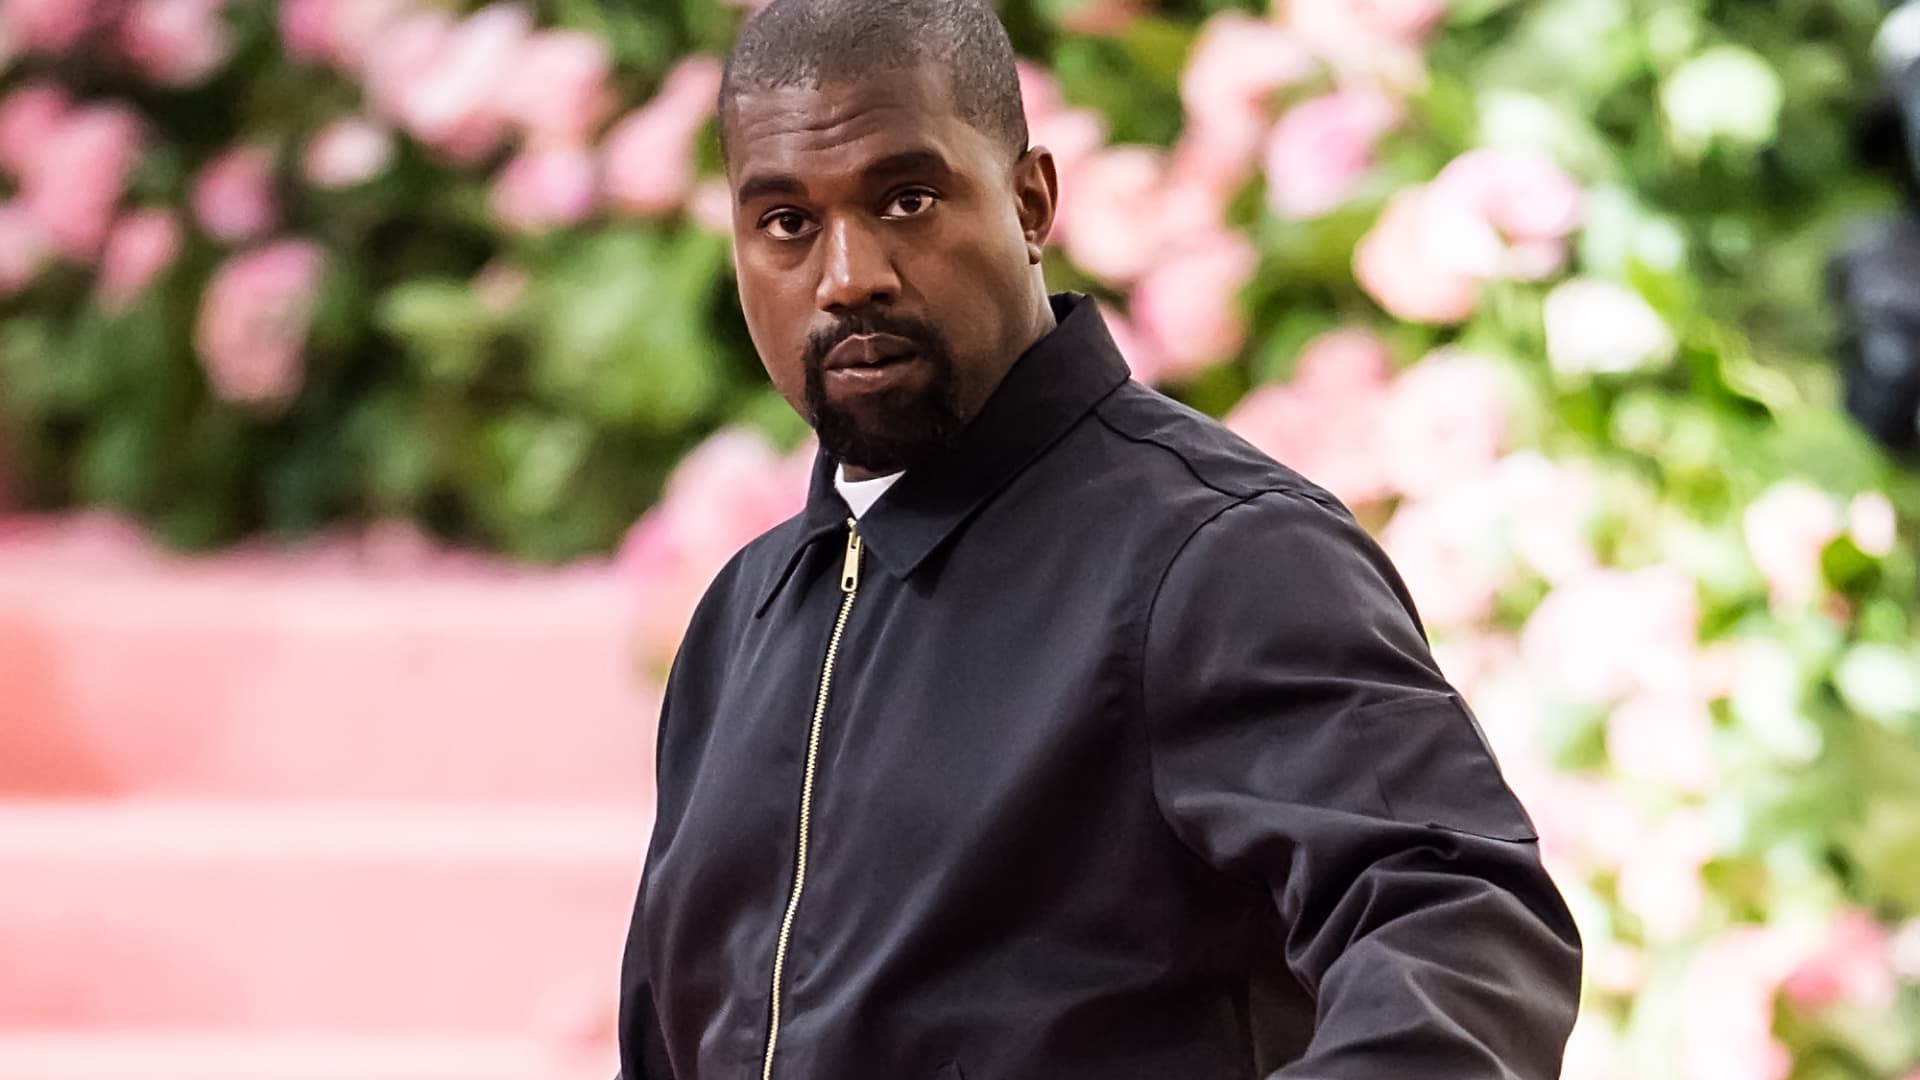 Adidas employees raised concerns about Ye’s conduct for years, report says